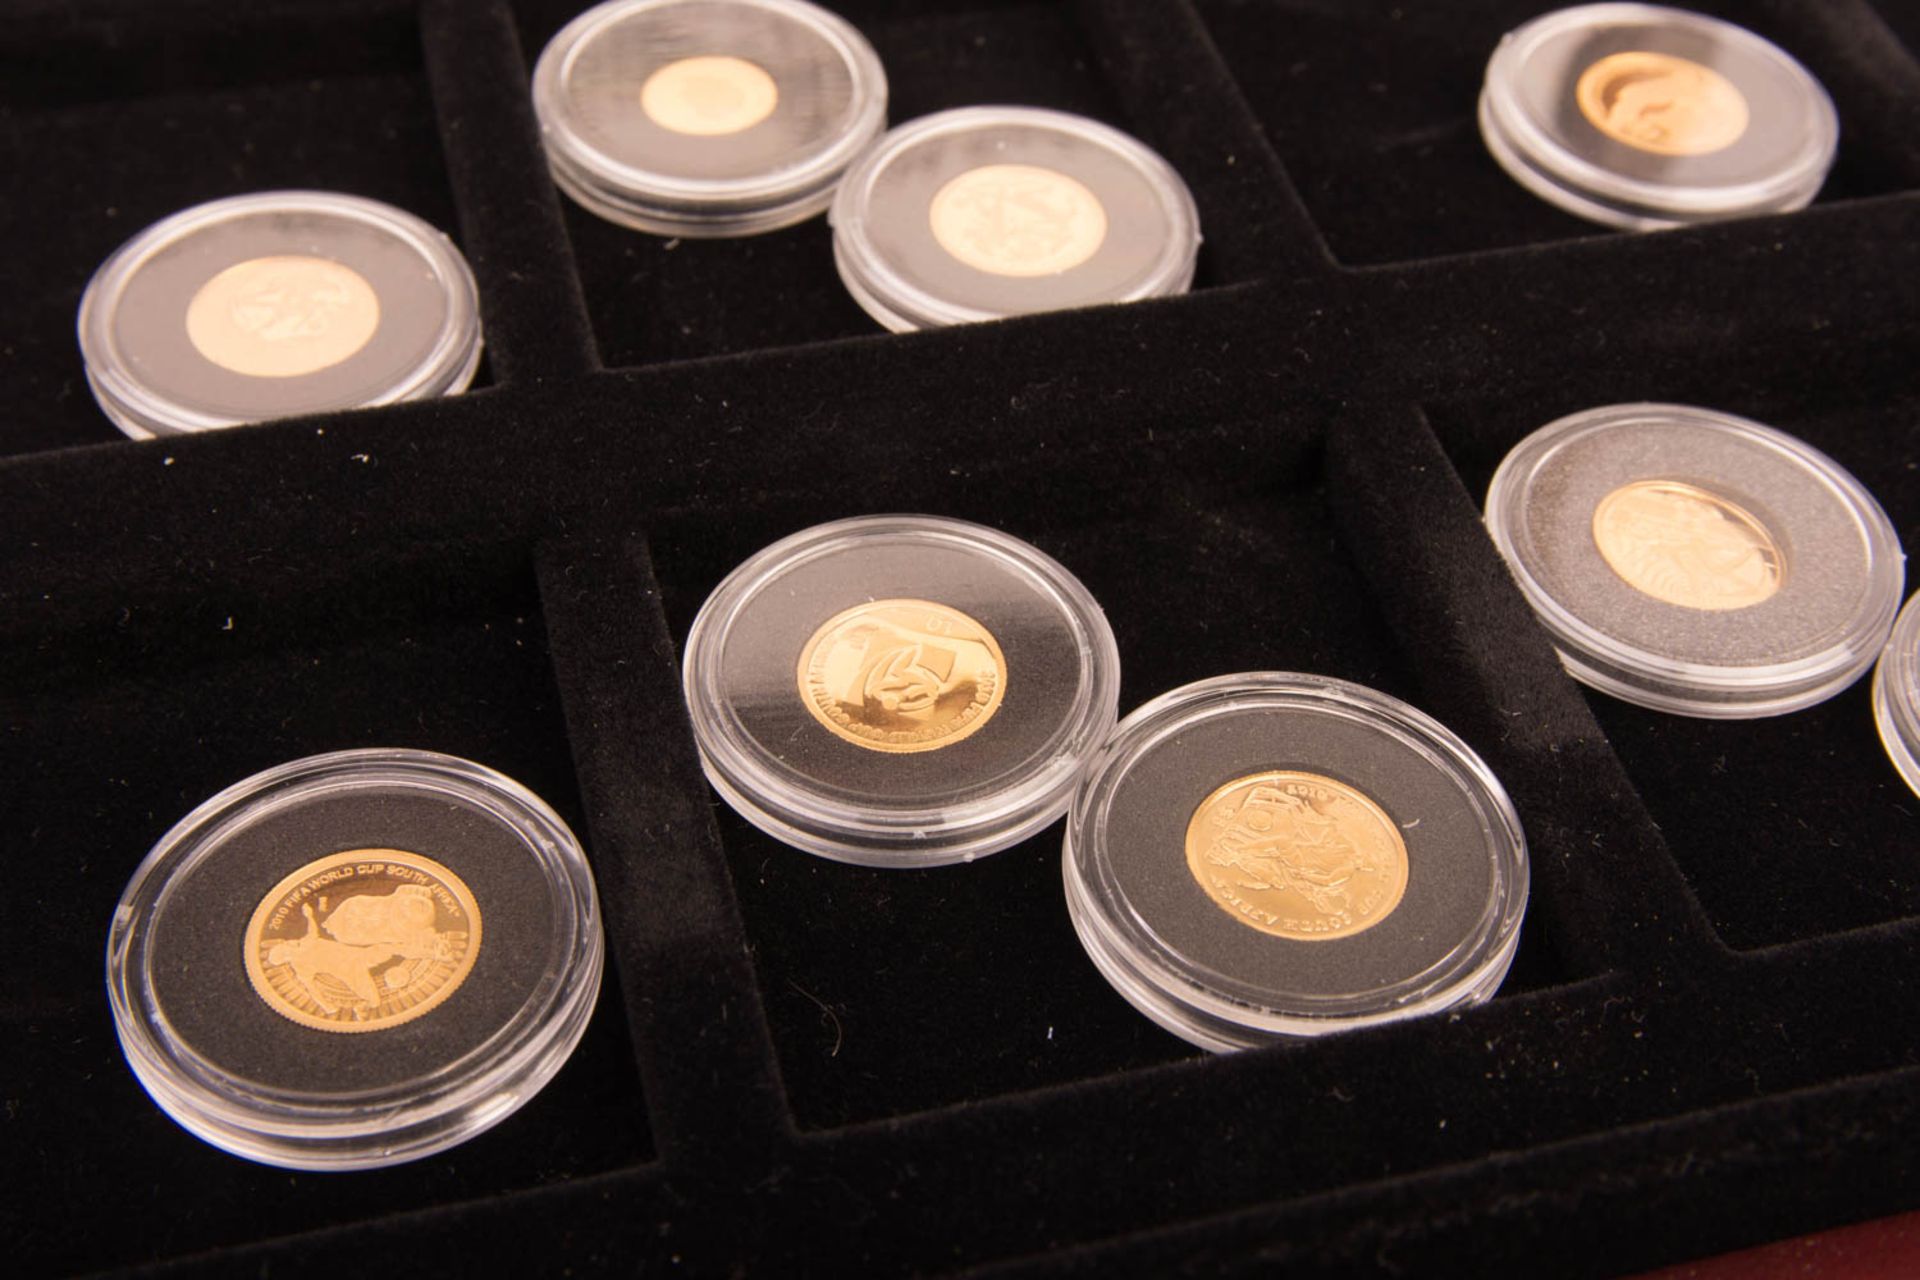 Gold and commemorative coins. - Image 2 of 9